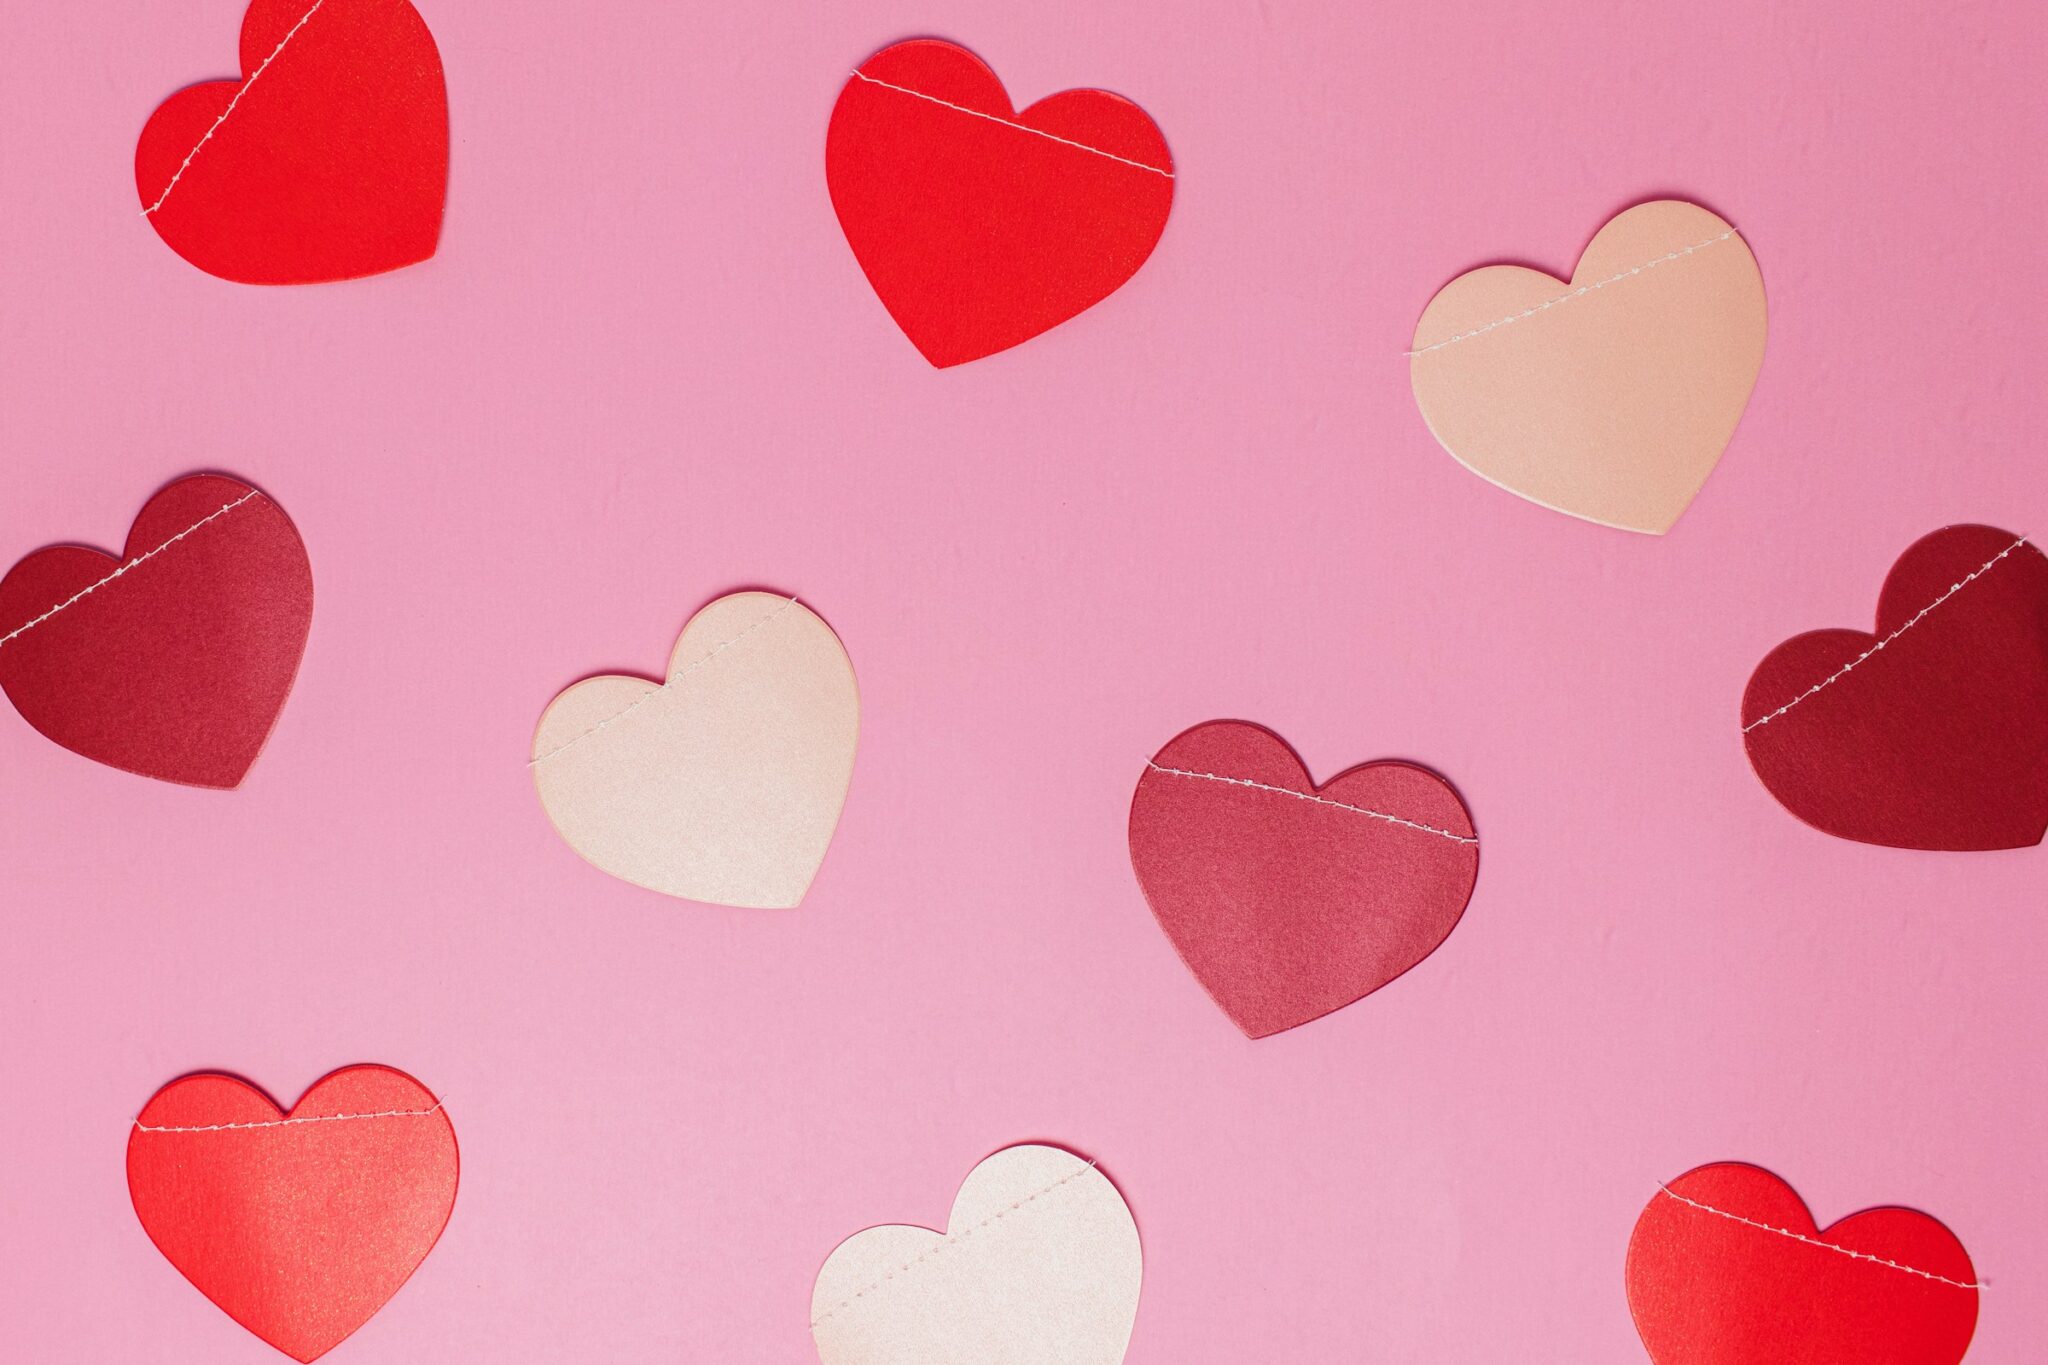 Sweet Tips to Care for Your Smile This Valentine’s Day